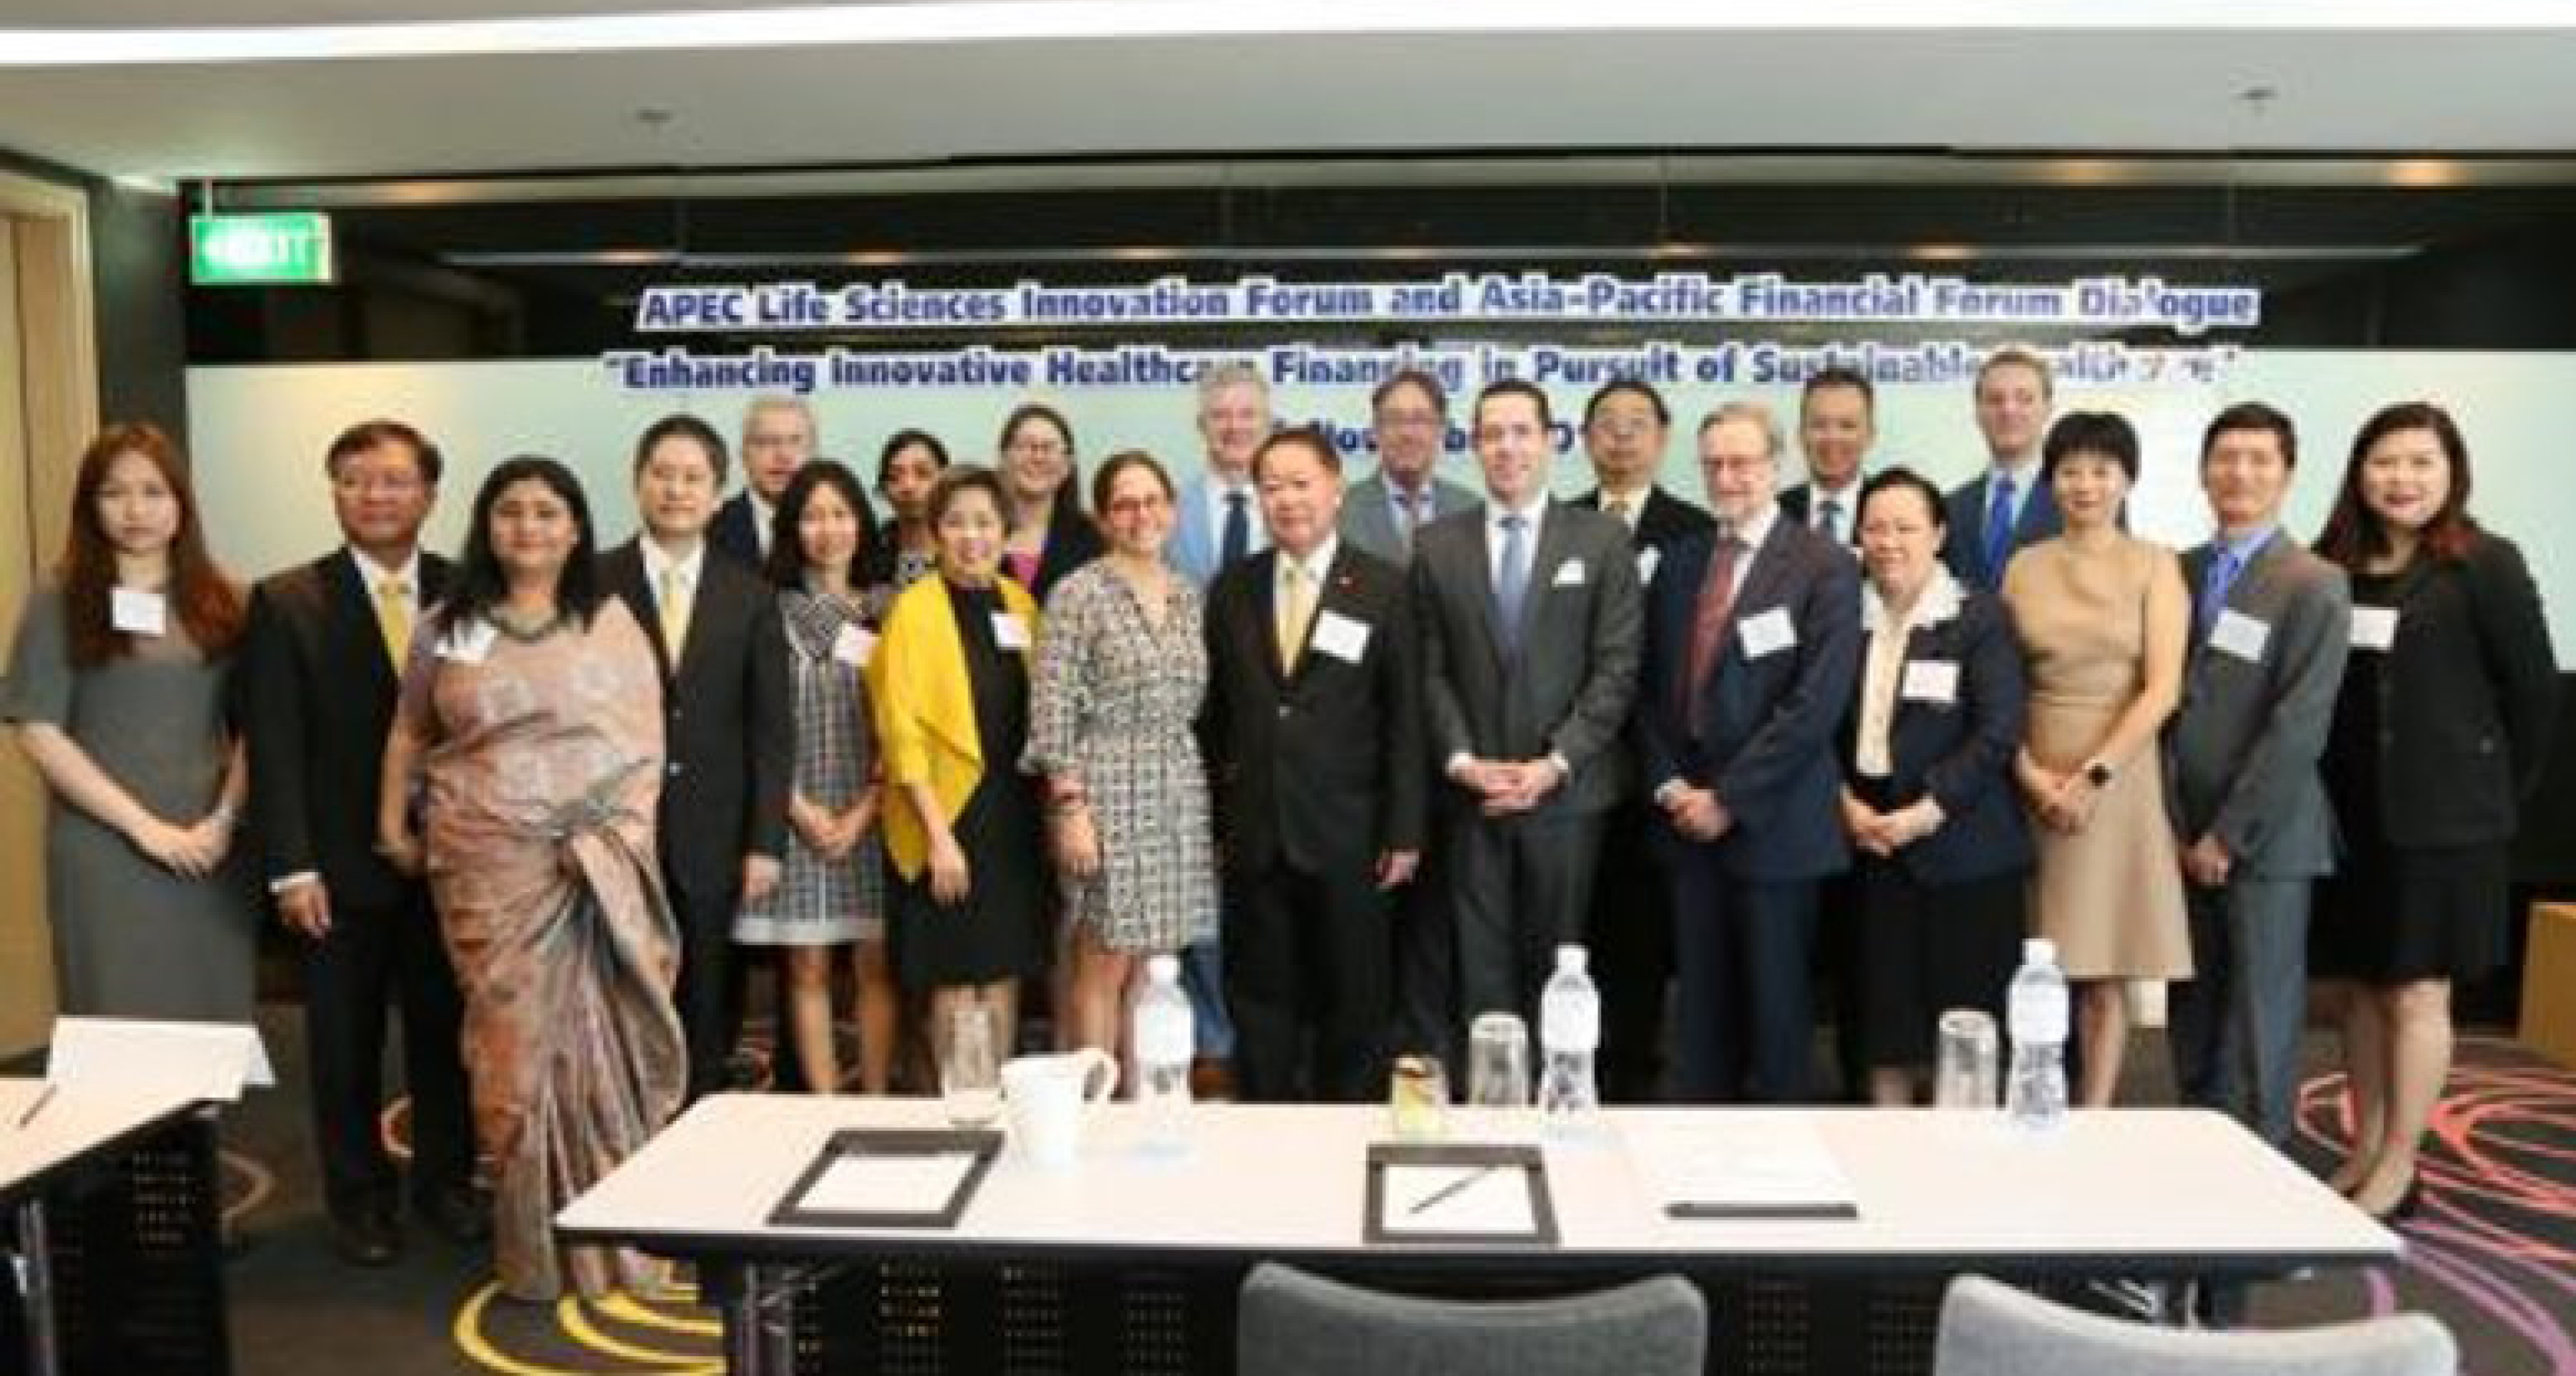 Enhancing Innovative Healthcare Financing in Pursuit of Sustainable Healthcare, Bangkok, Thailand